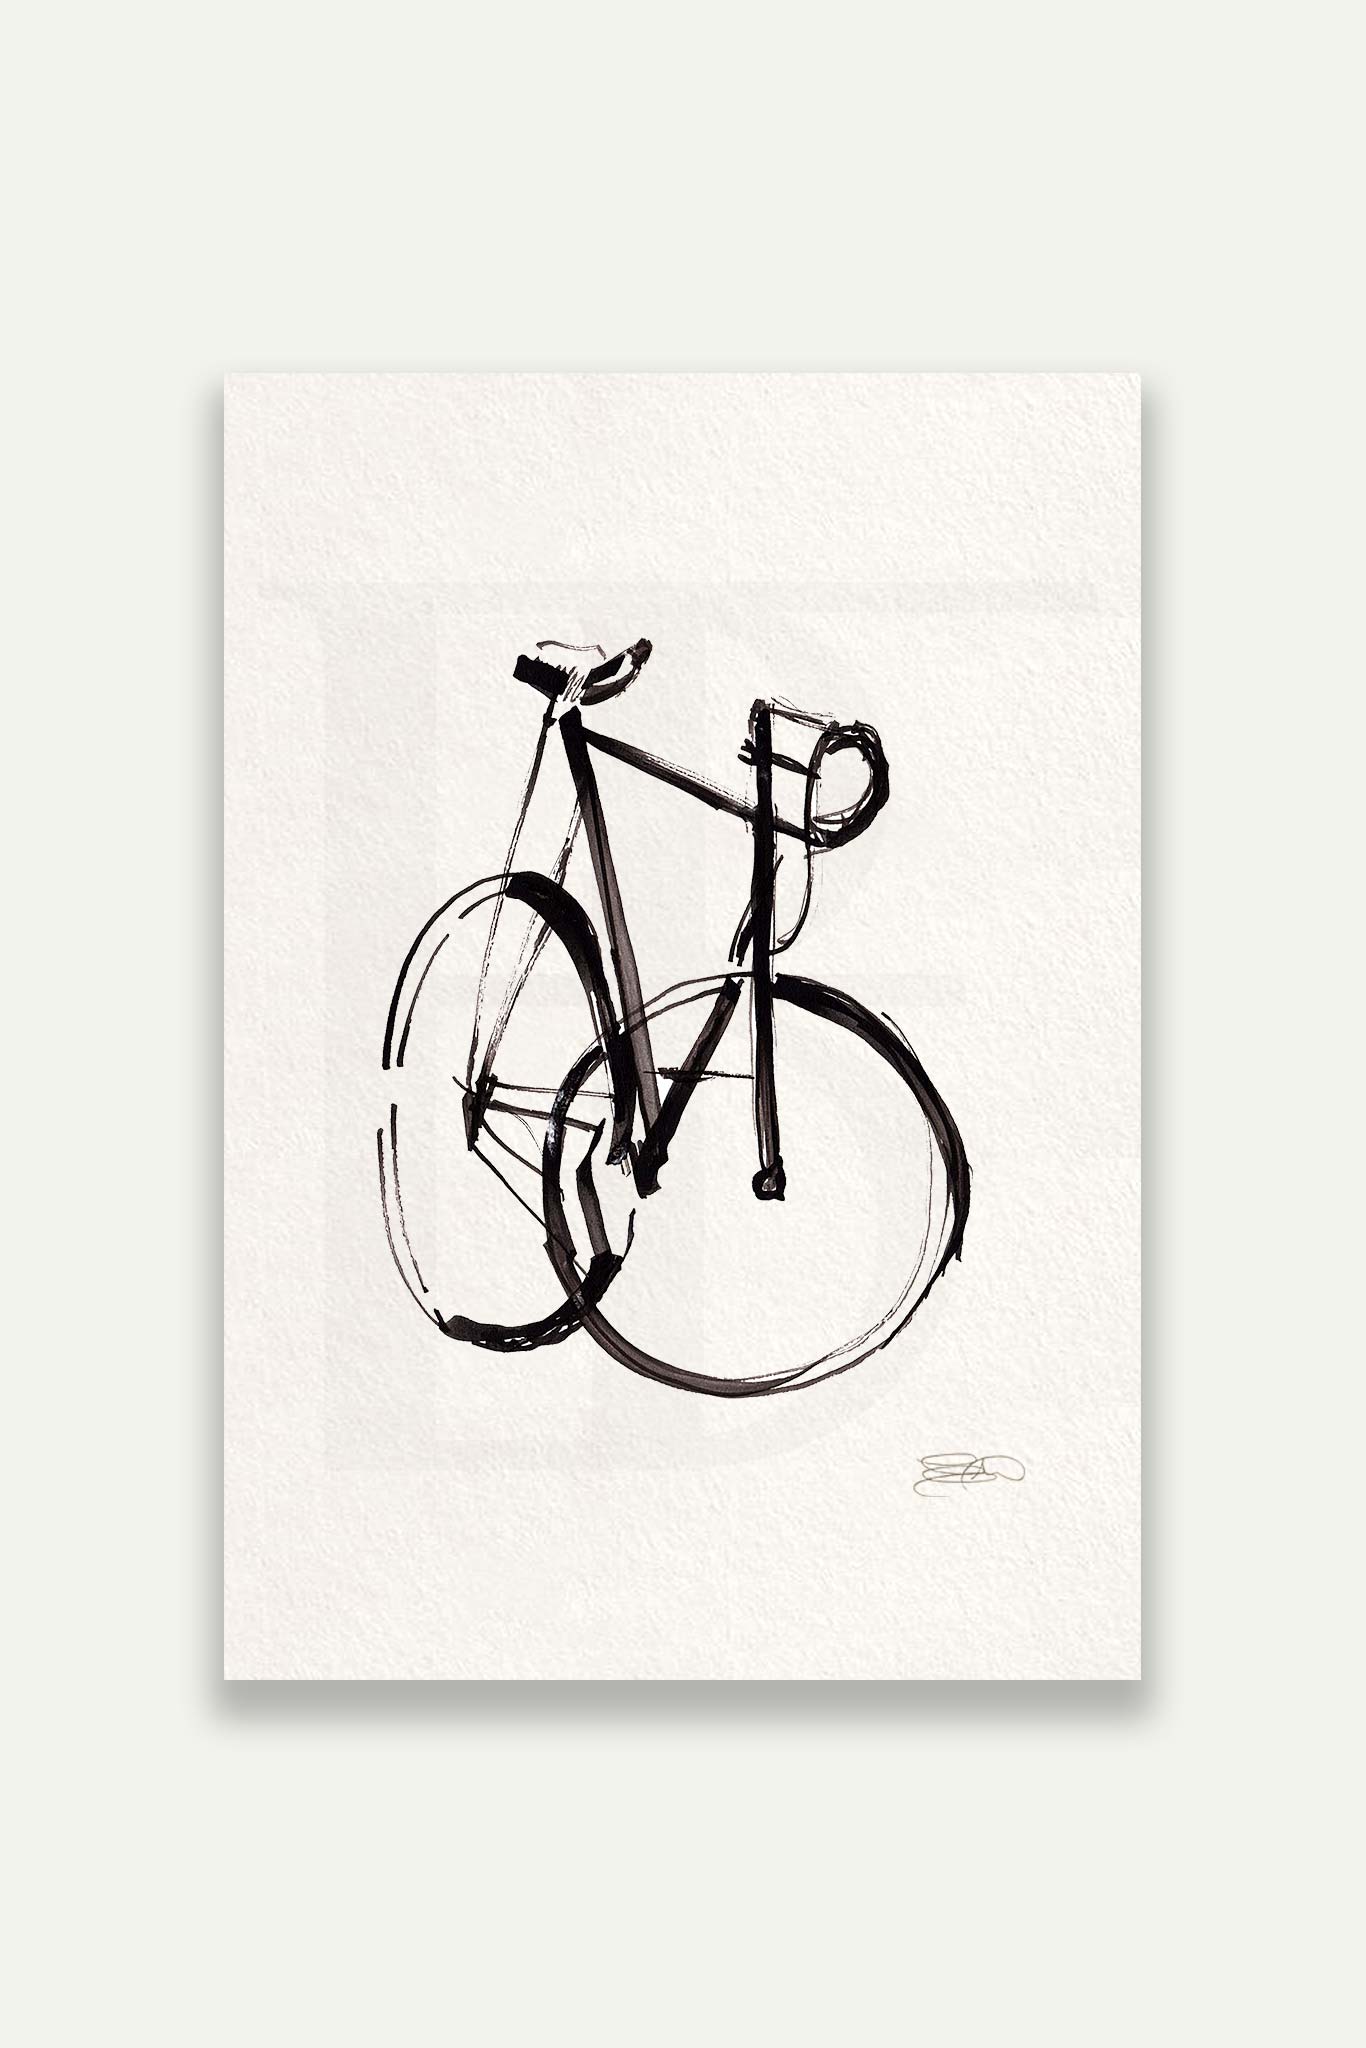 Fixie Bike, by Fable